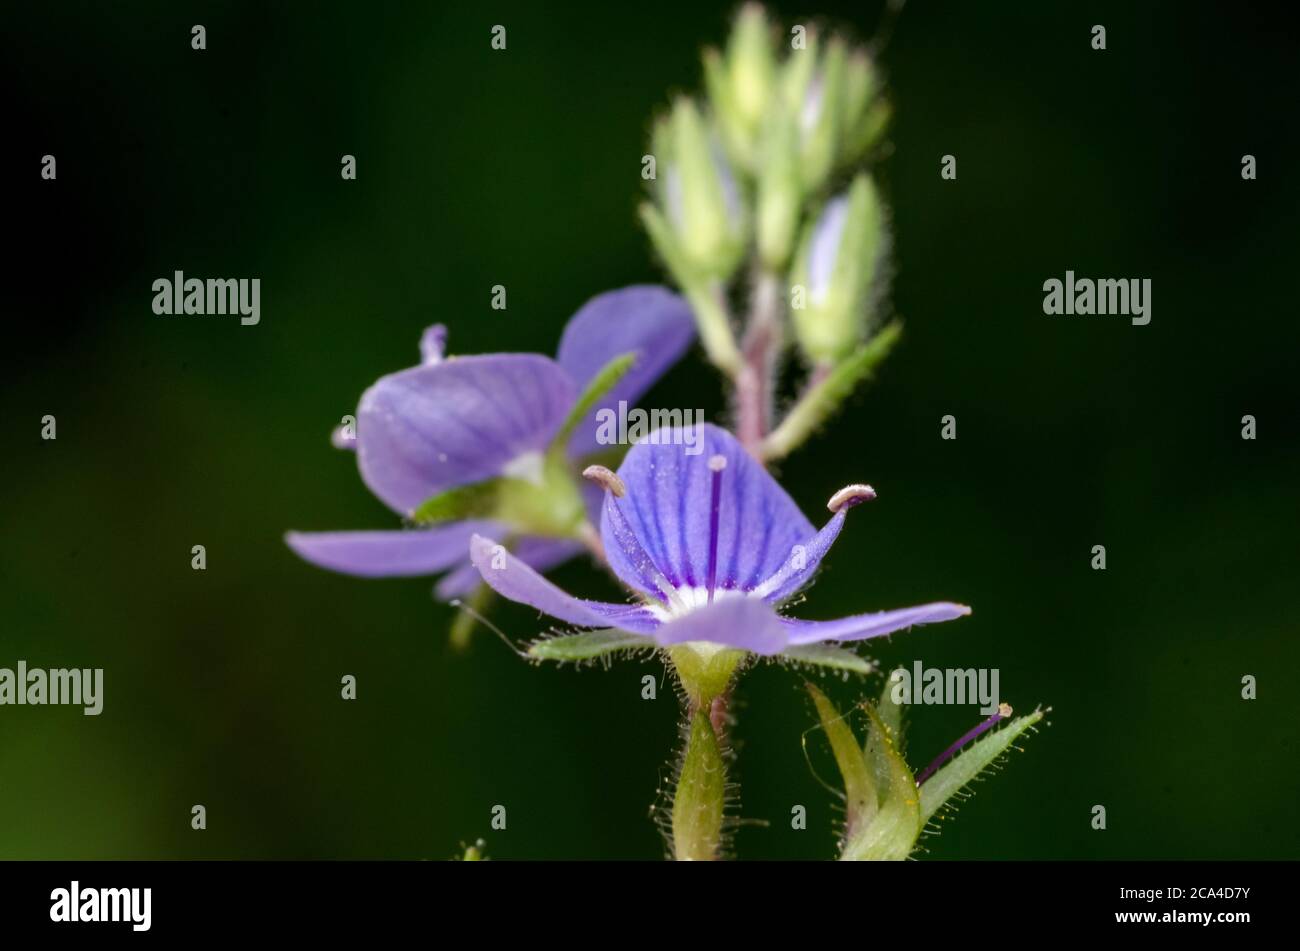 Veronica officinalis, Veronica chamaedrys, Speedwell flowers also known as bird's eye or gypsyweed, close-up, Germany, Western Europe Stock Photo